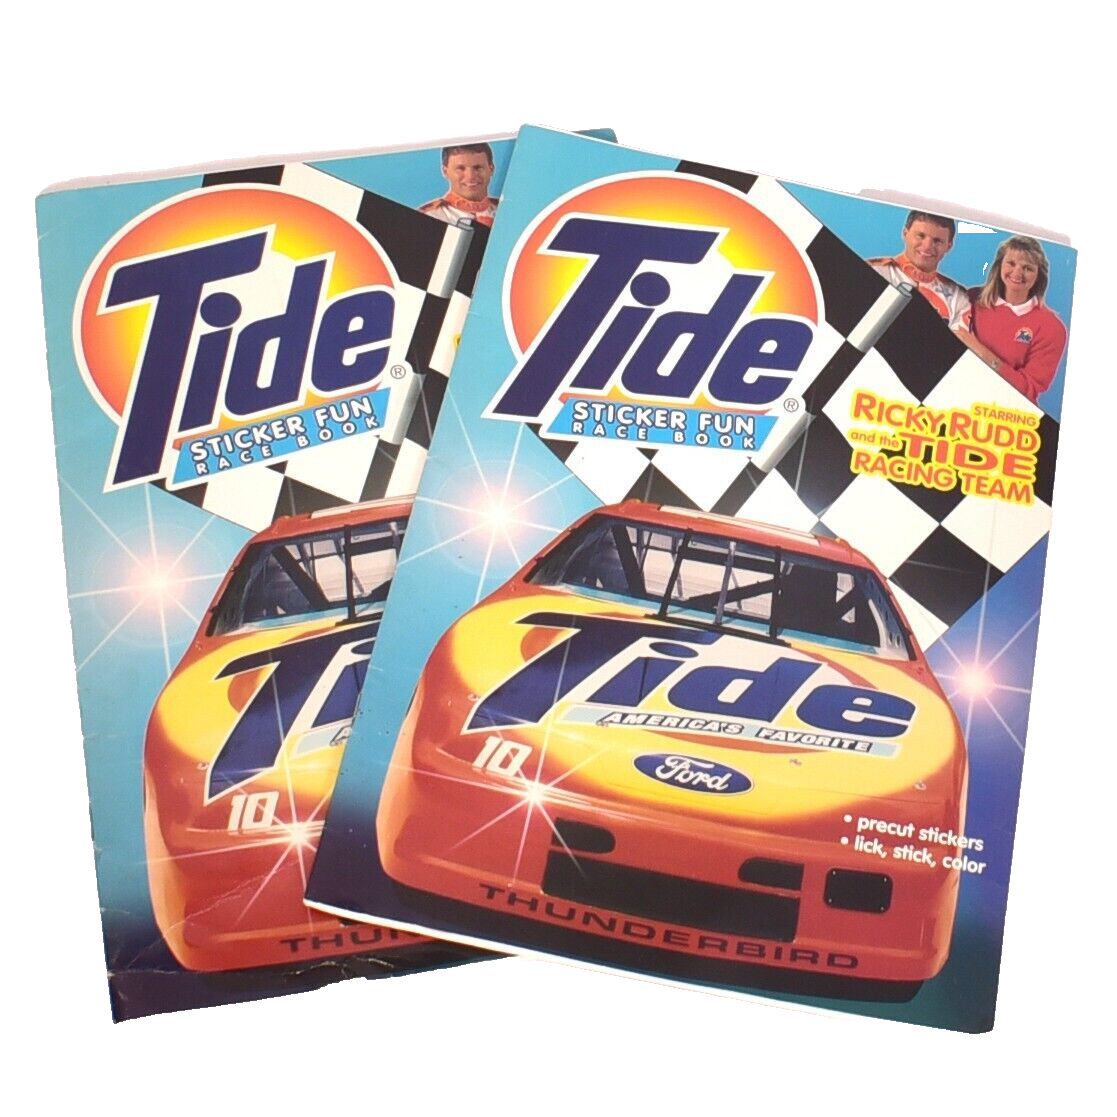 Primary image for Ricky Rudd Tide Sticker Fun Race Book 1993 Only One Is Unused and New NASCAR